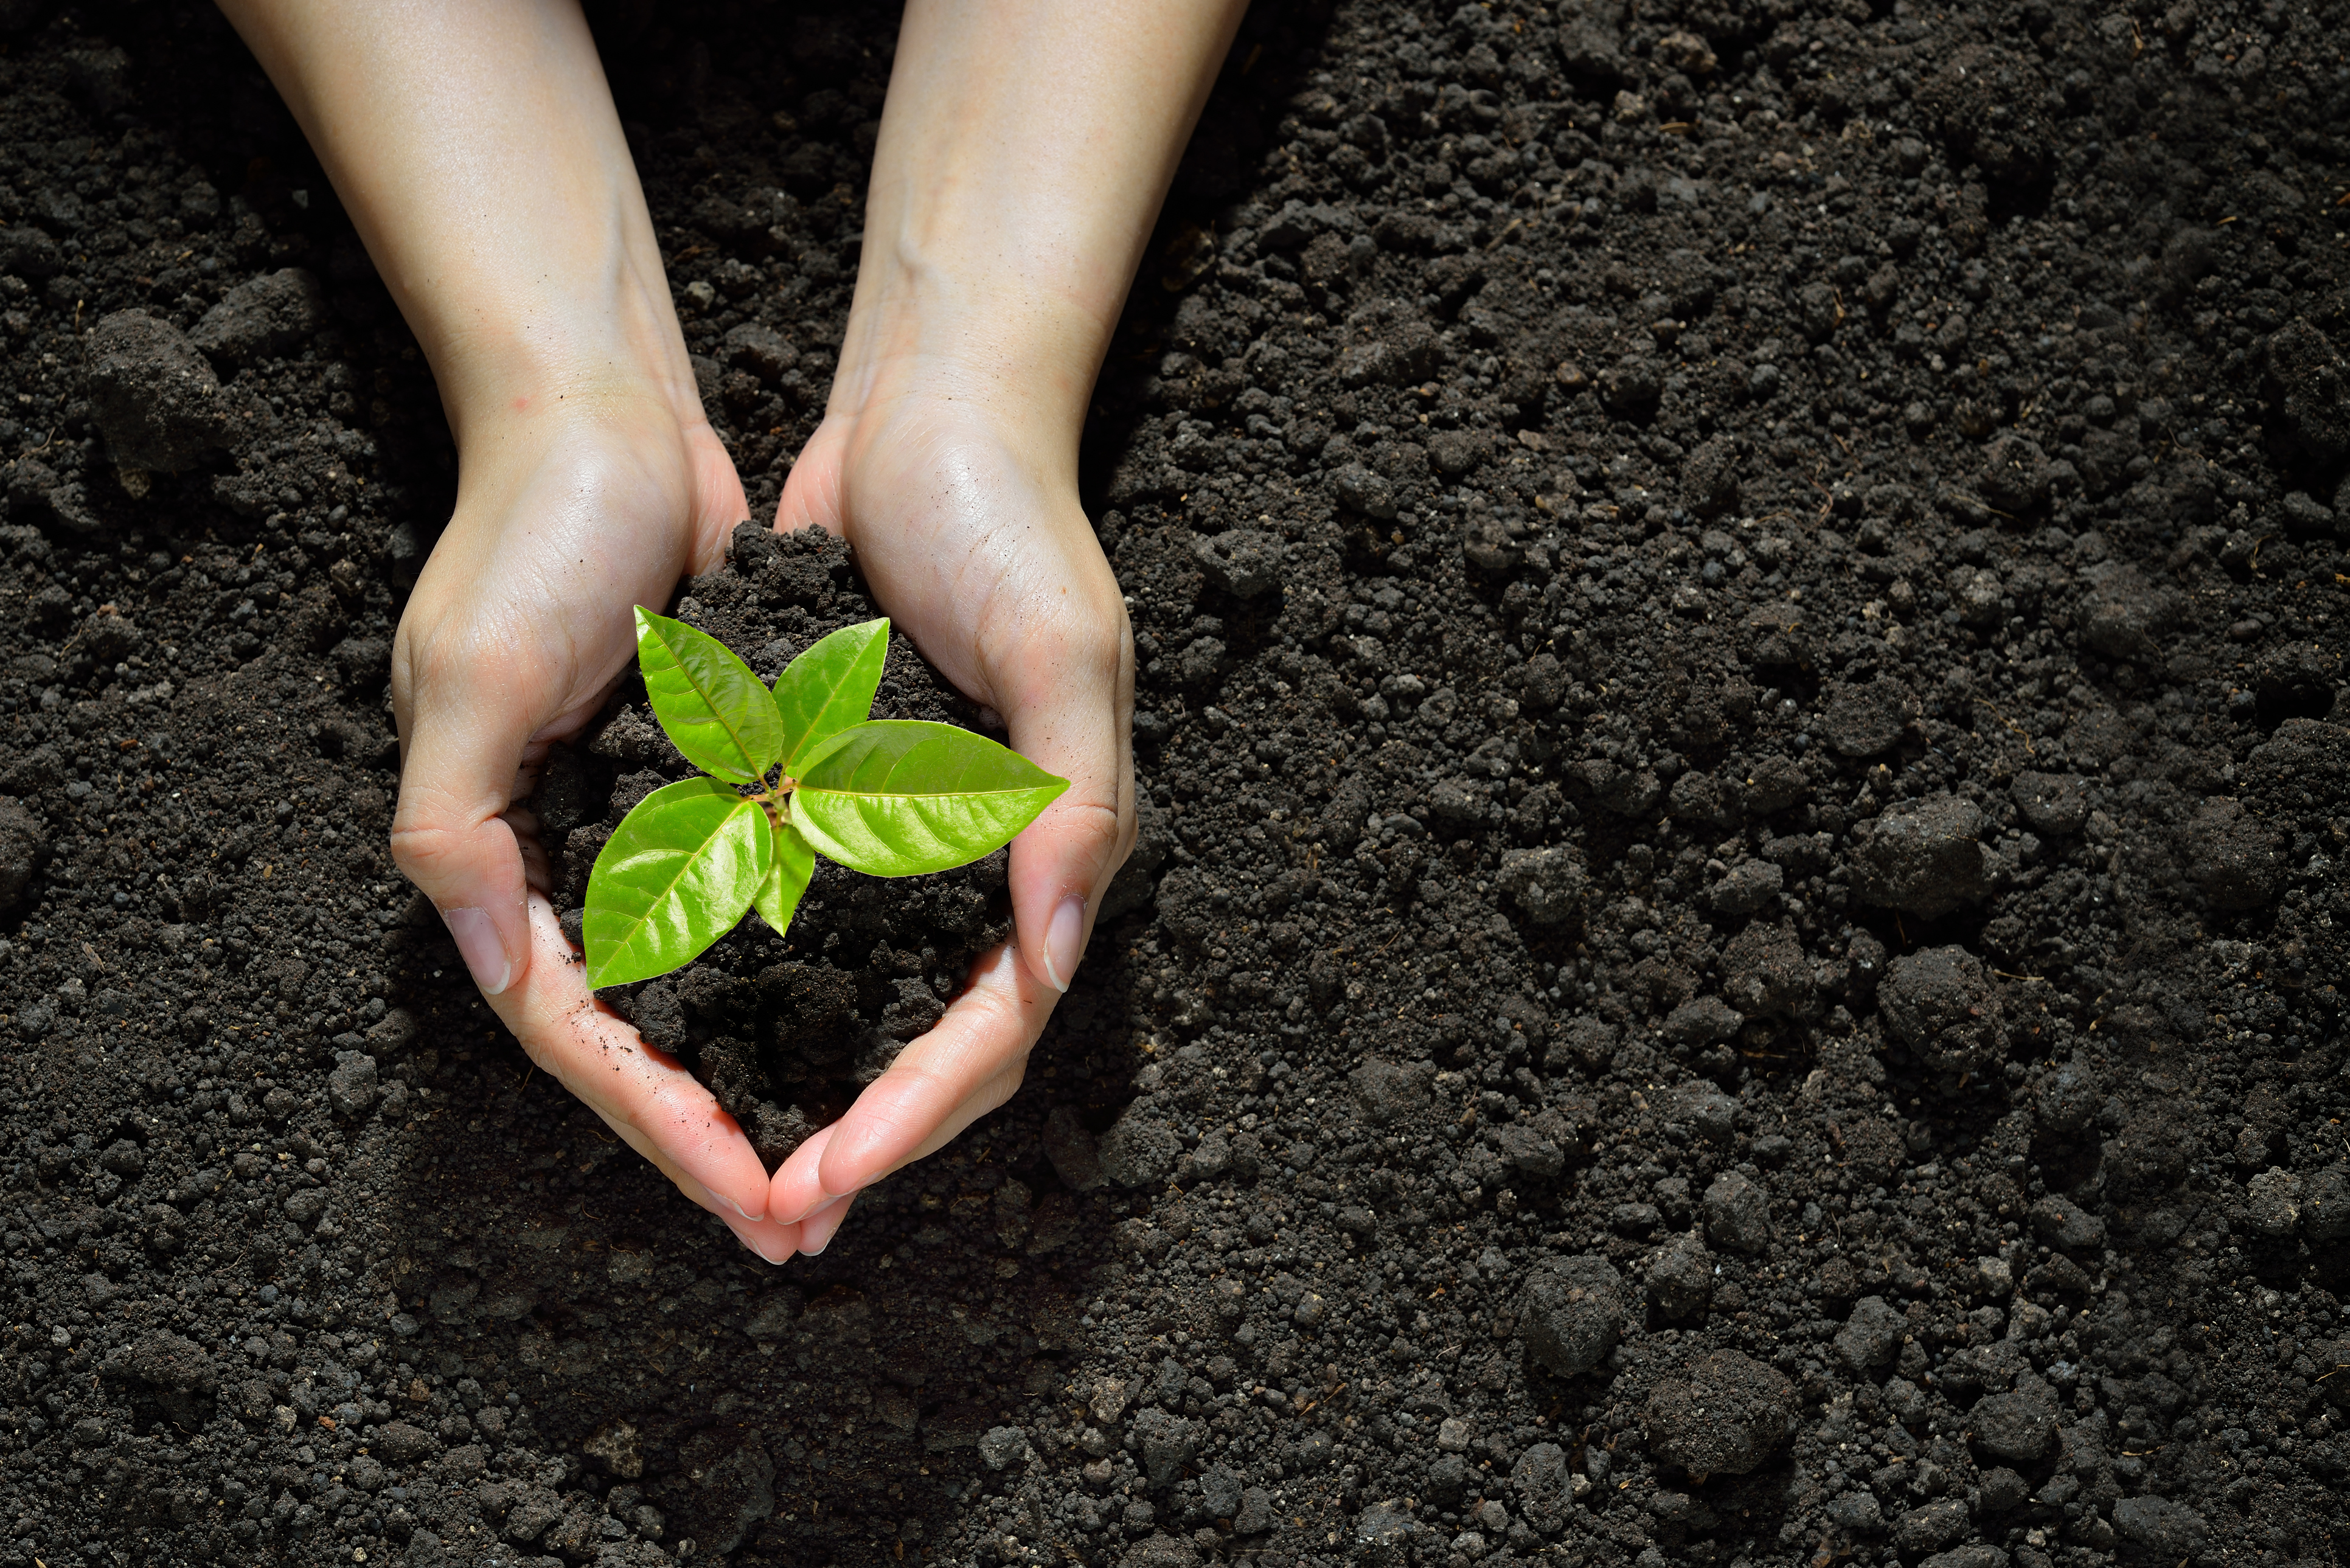 Contact with soil helps build the immune system (Thinkstock/PA)